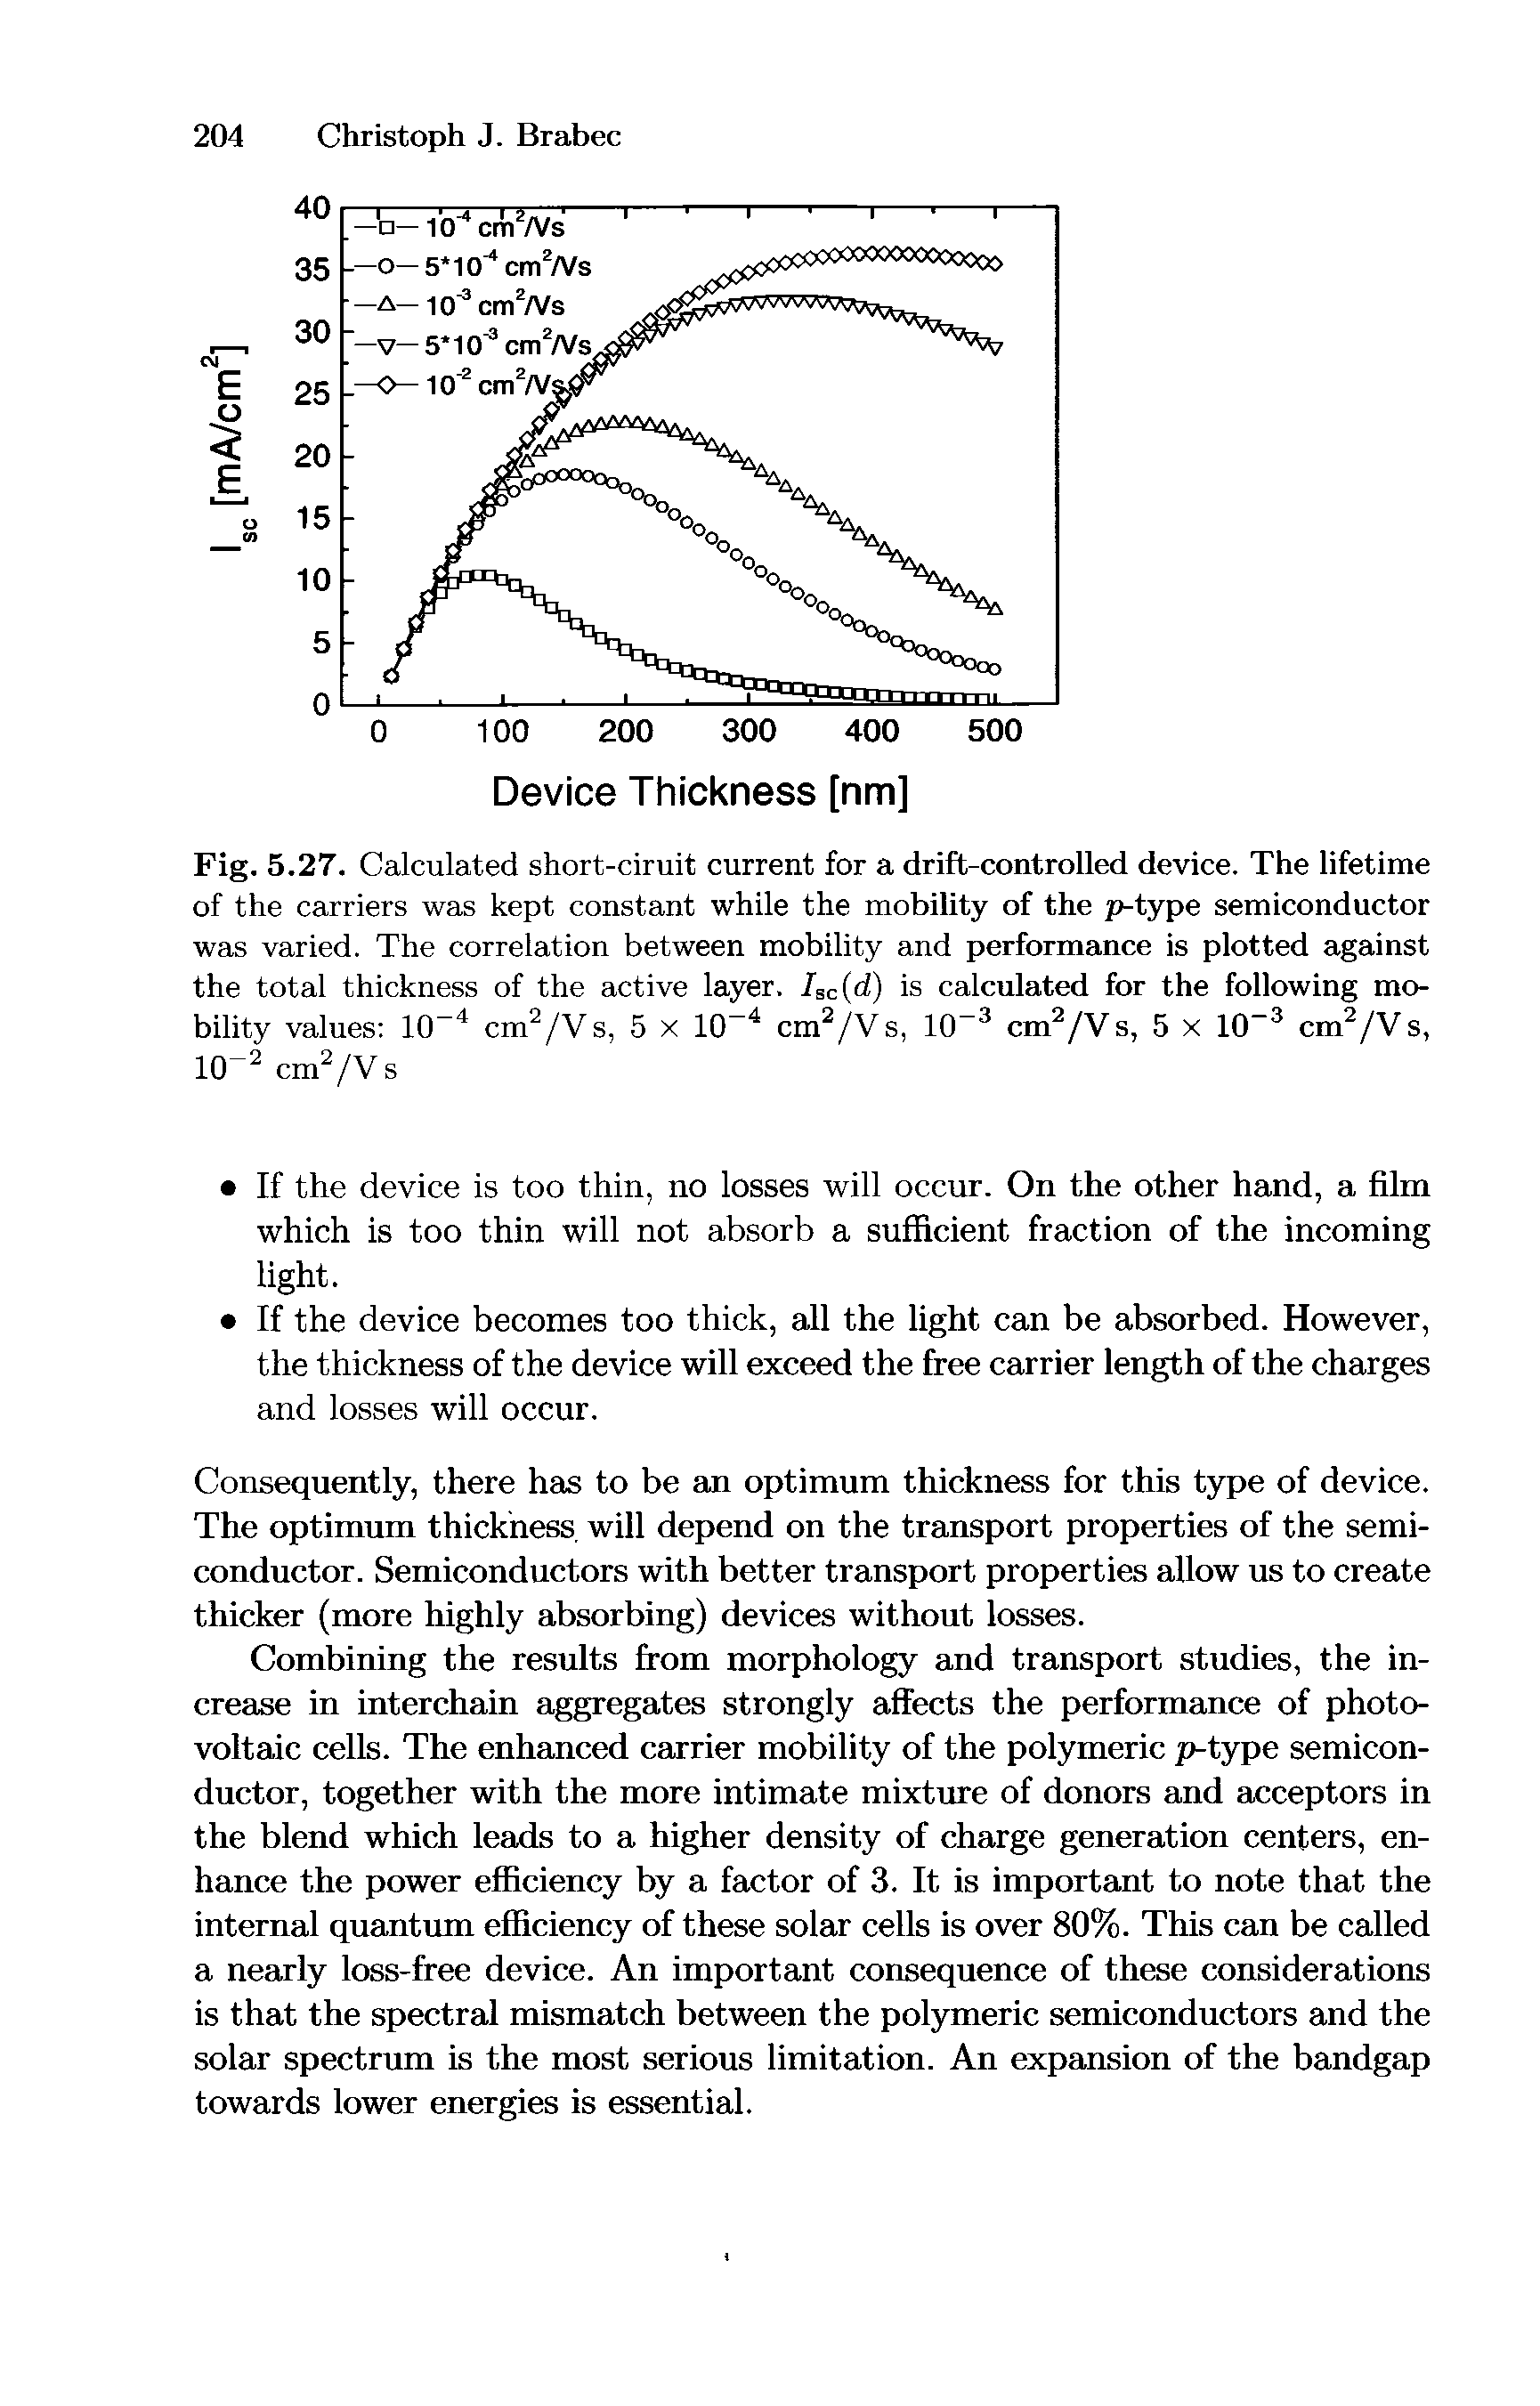 Fig. 5.27. Calculated short-ciruit current for a drift-controlled device. The lifetime of the carriers was kept constant while the mobility of the p-type semiconductor was varied. The correlation between mobility and performance is plotted against the total thickness of the active layer. Isc(d) is calculated for the following mobility values 10-4 cm2/Vs, 5 x 10-4 cm2/Vs, 10-3 cm2/Vs, 5 x 10-3 cm2/Vs, 10 2 cm2/Vs...